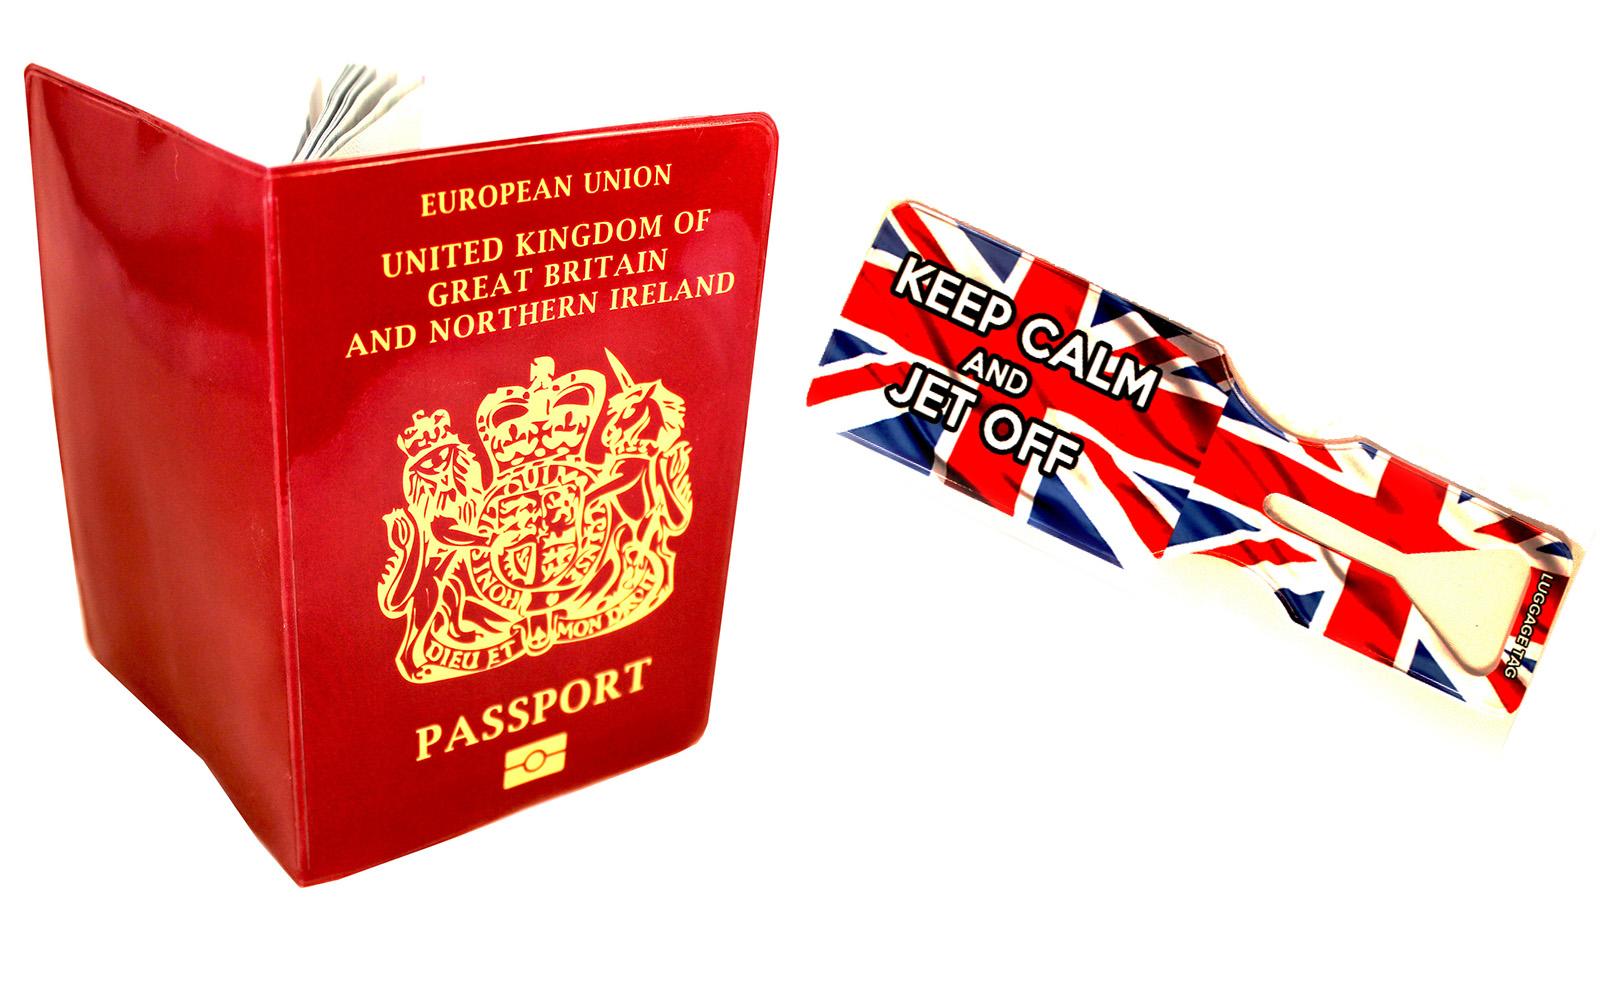 UK Standard Passport and Keep Calm Union Jack Passport Cover and Luggage Tag Set